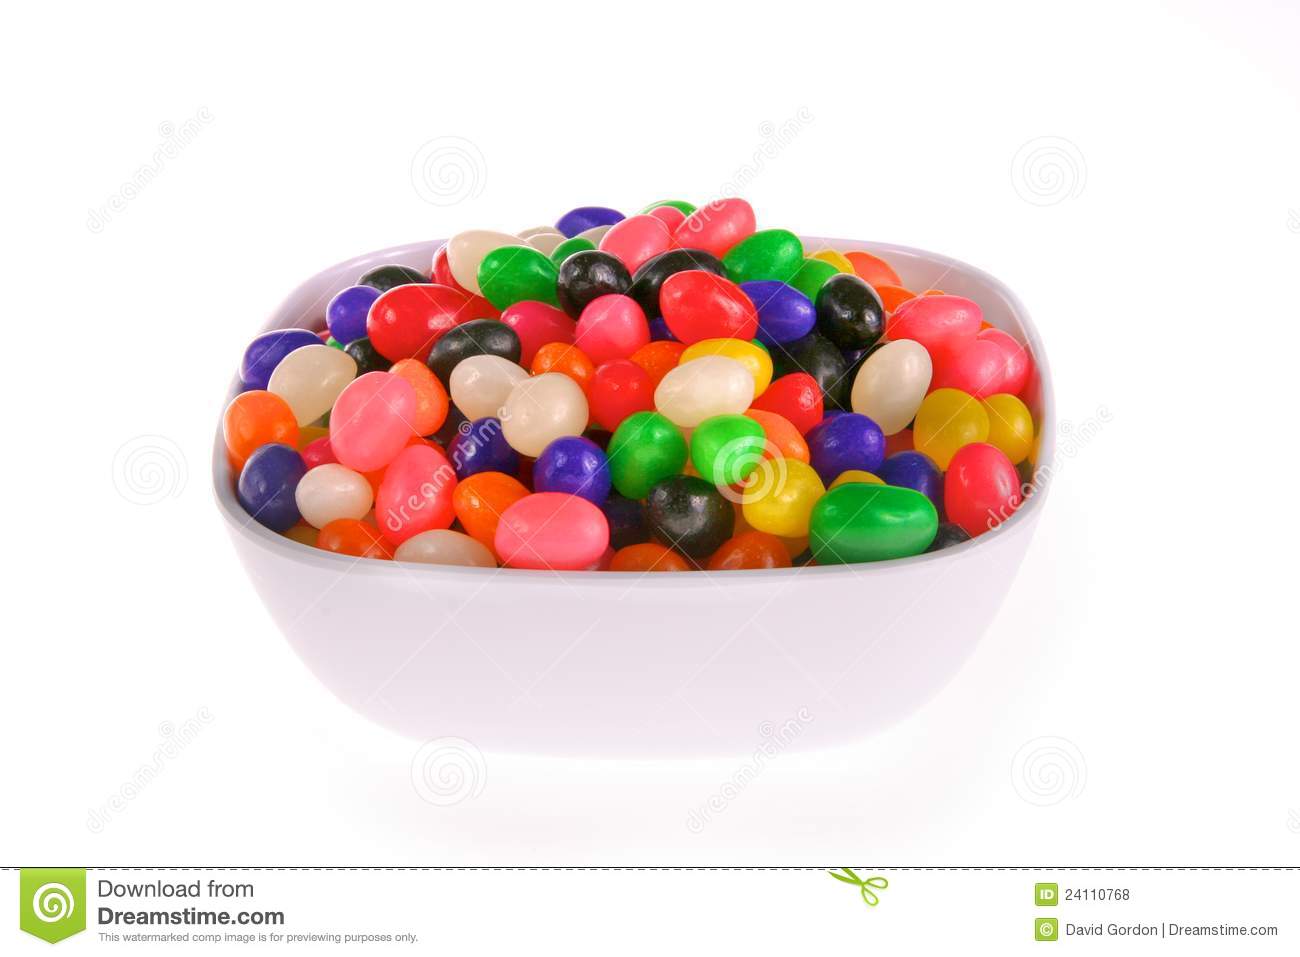 More Similar Stock Images Of   Bowl Of Colorful Jelly Beans  